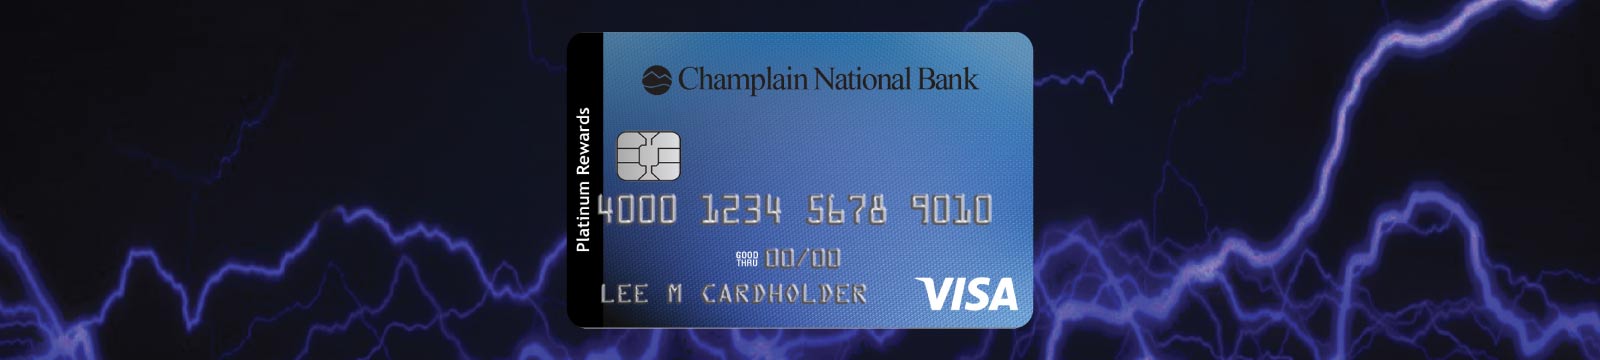 Visa Credit Card with Lightning Bolts Behind it